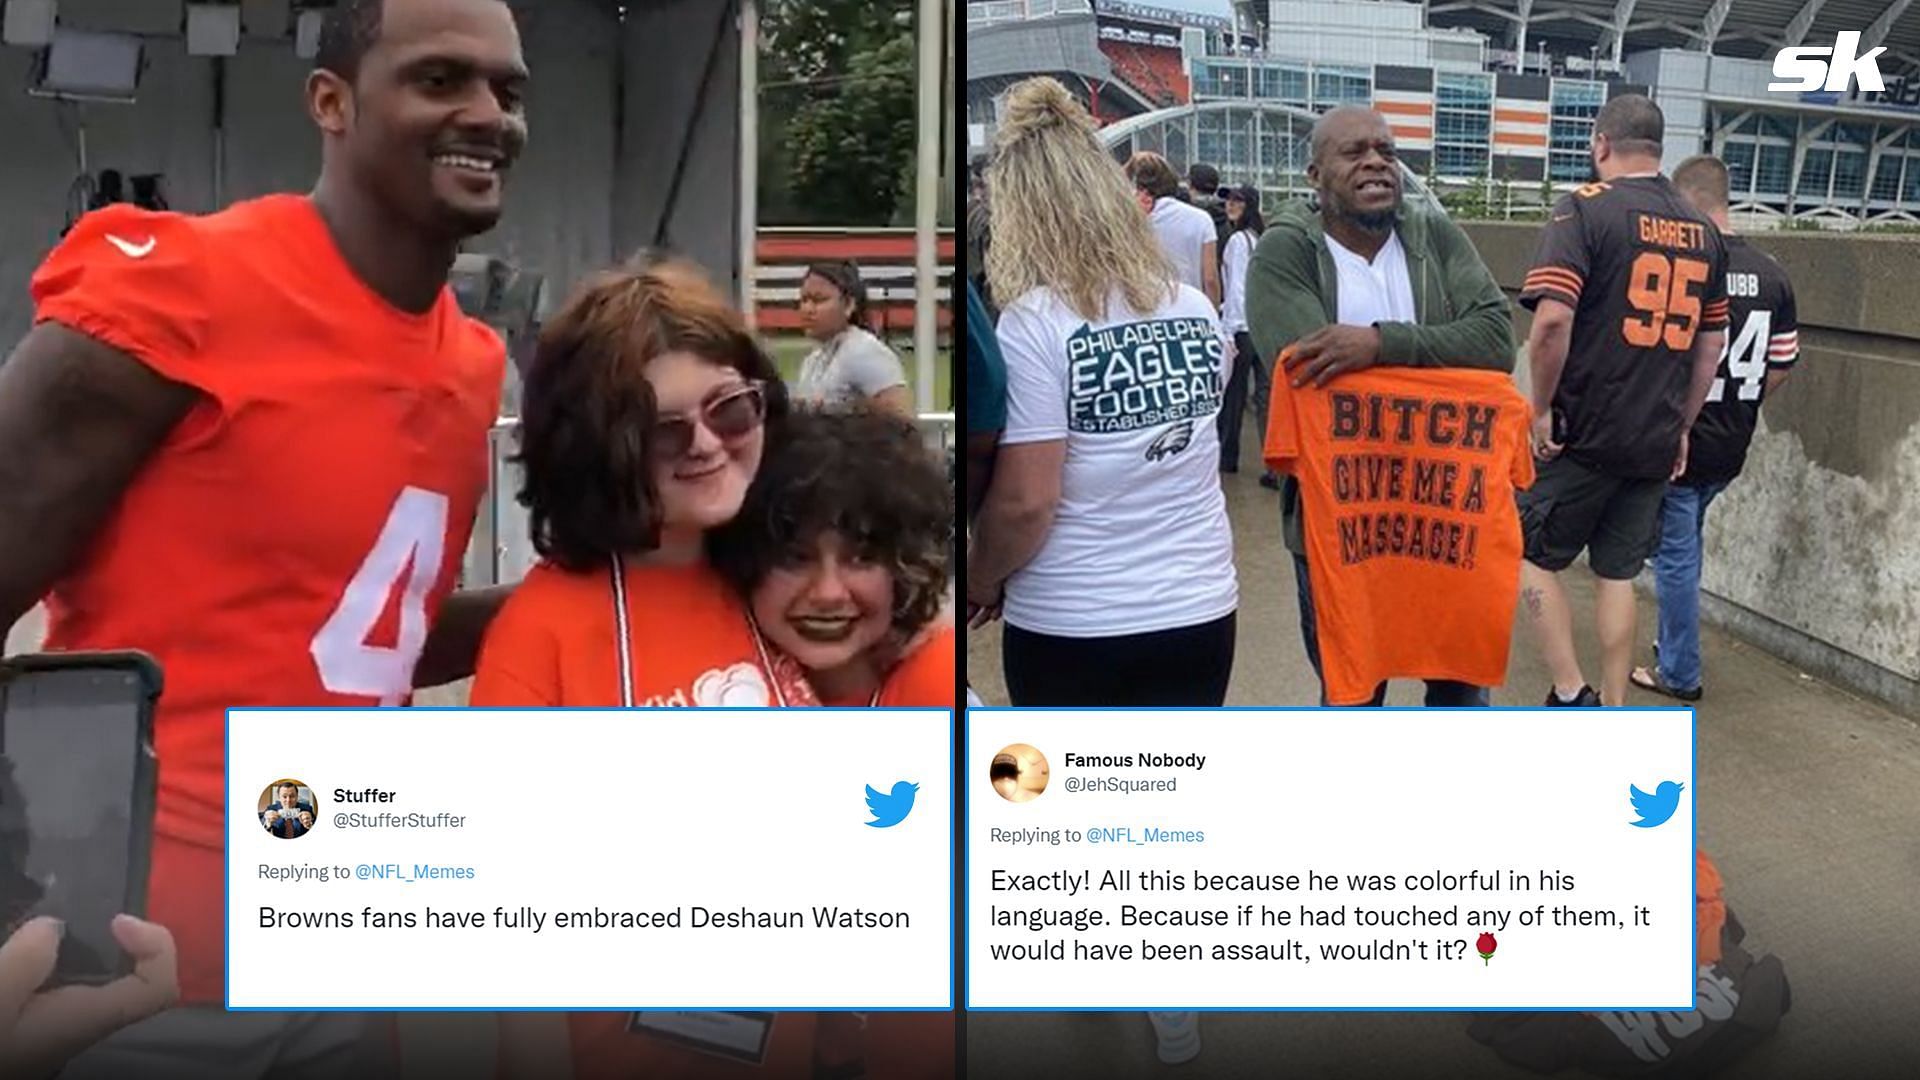 Some NFL fans have fully embraced Deshaun Watson